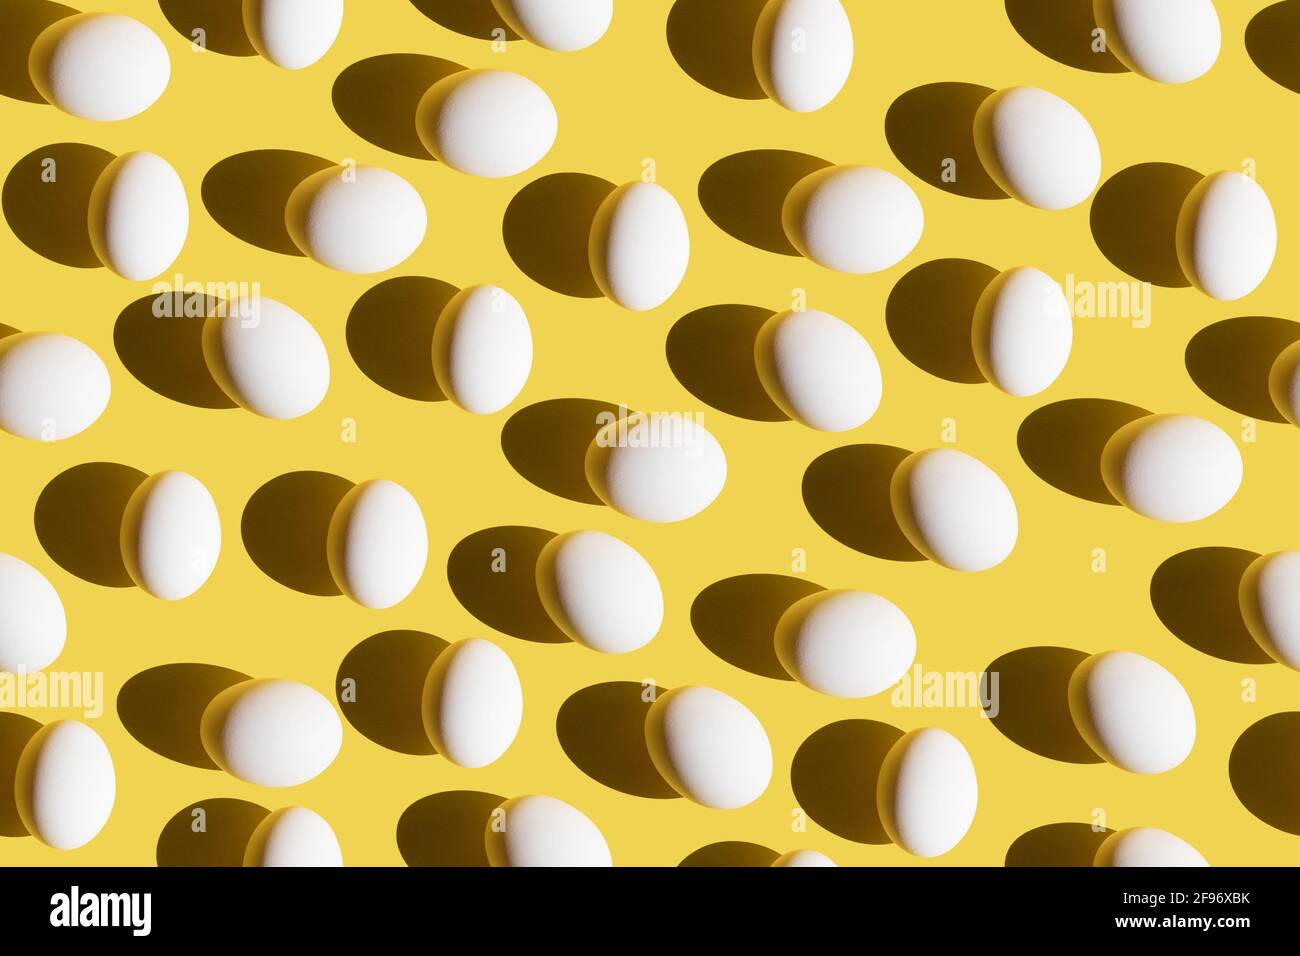 Seamless pattern with white eggs and trend summer shadows on yellow background. Minimal Easter or food concept. Flat lay. Stock Photo